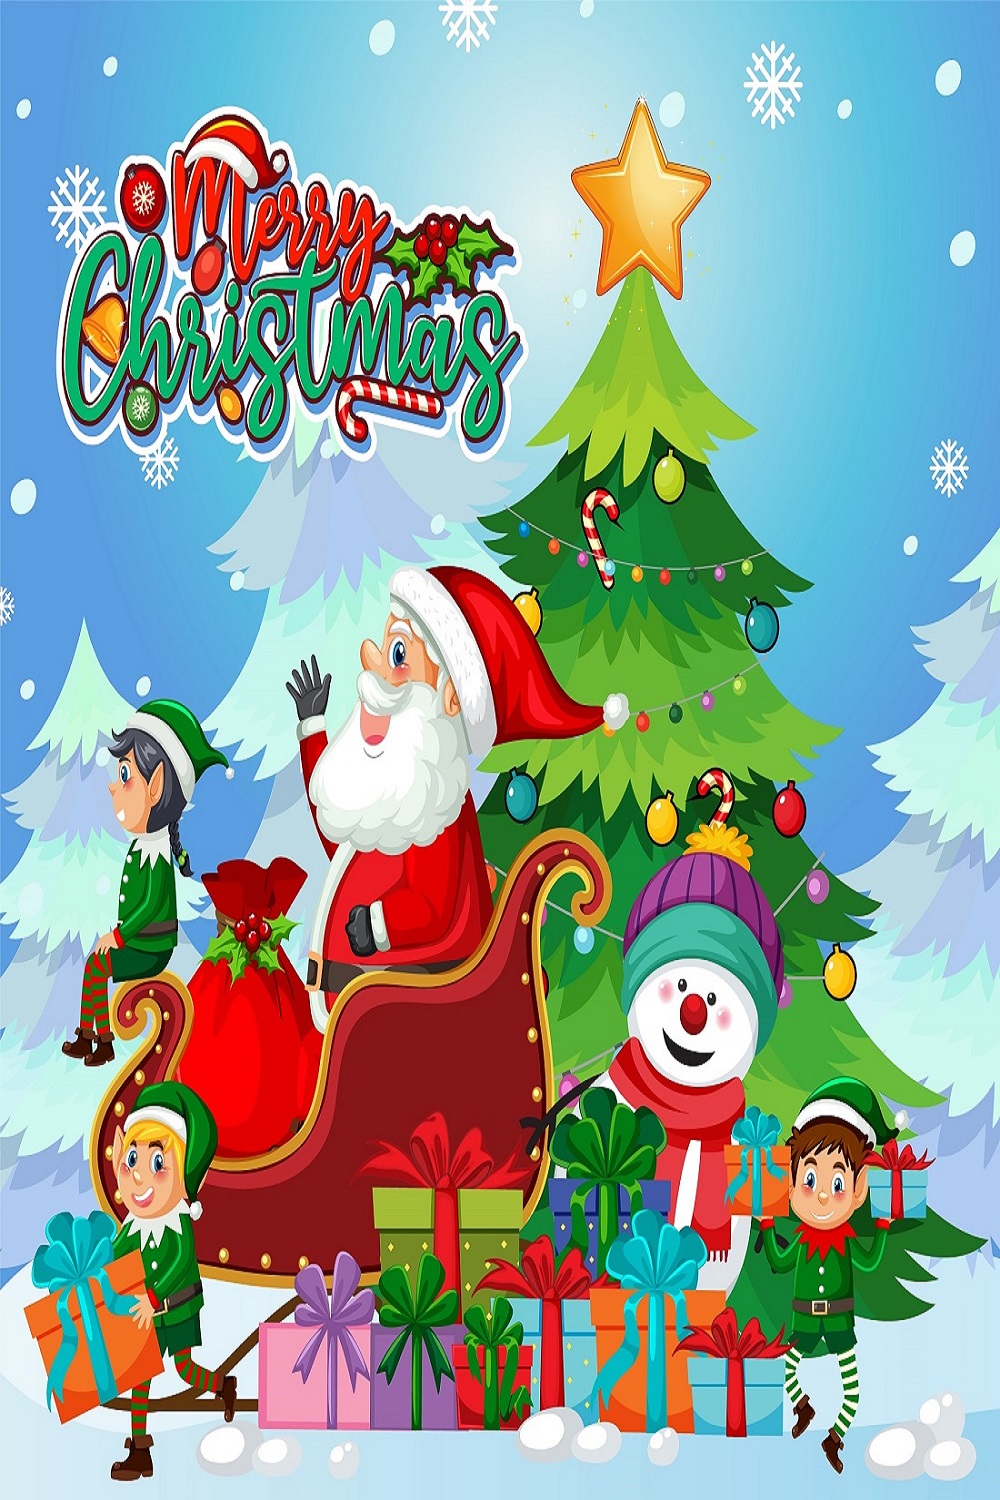 Merry Christmas poster design pinterest preview image.